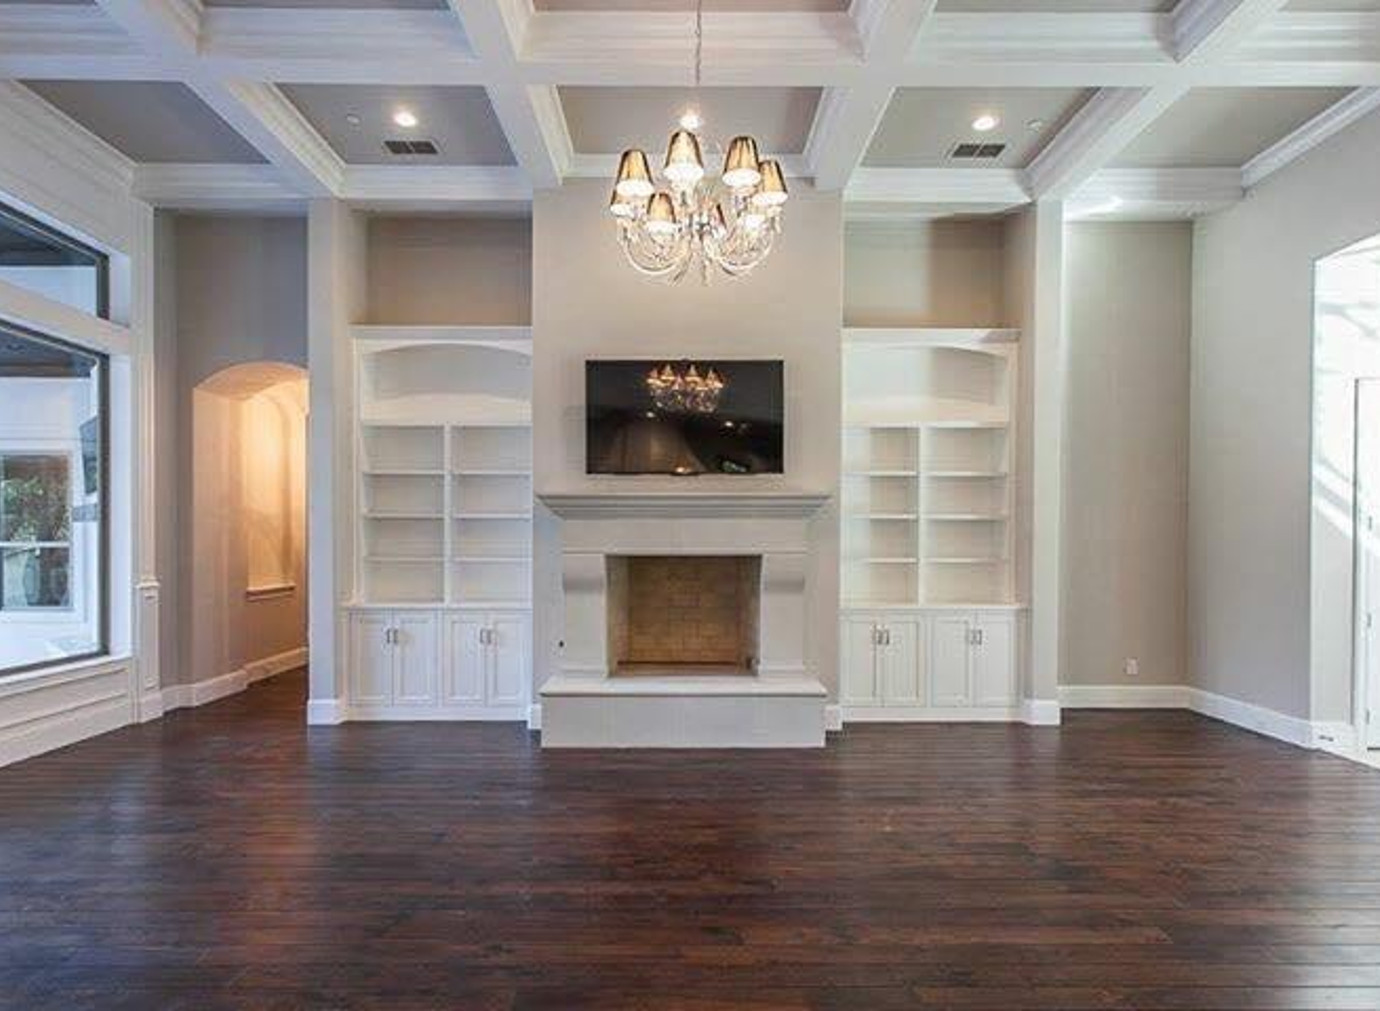 <span style="font-size:28px;"><span style="color:#7f8c8d;"><span style="background-color:#ffffff;">Trusted Carpenters in Denton, Texas</span></span></span>